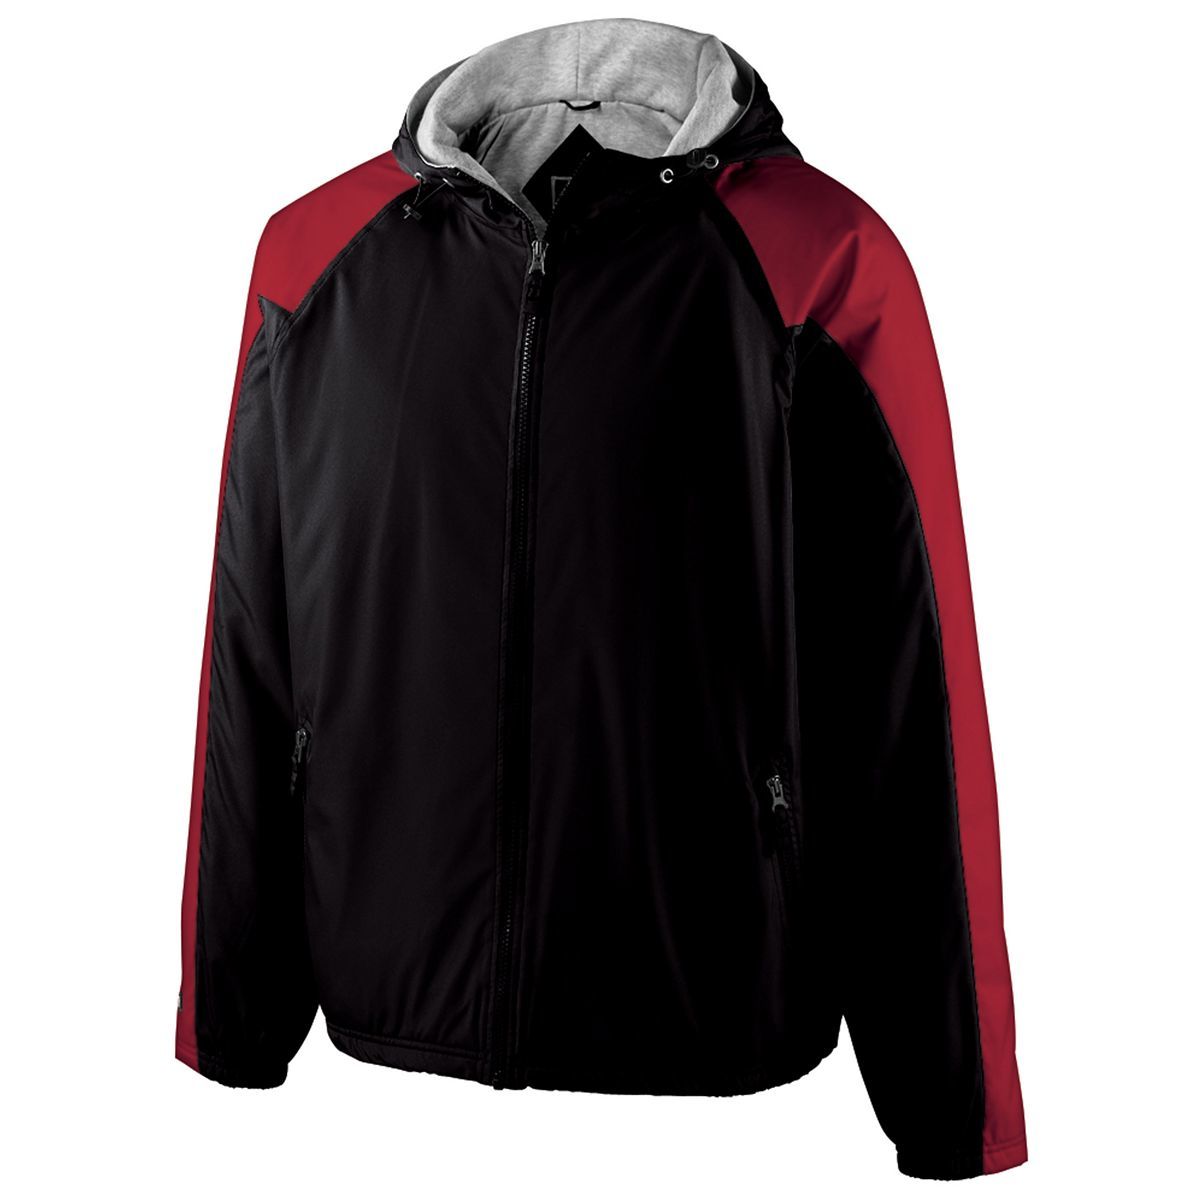 Holloway Homefield Jacket in Black/Scarlet  -Part of the Adult, Adult-Jacket, Holloway, Outerwear product lines at KanaleyCreations.com